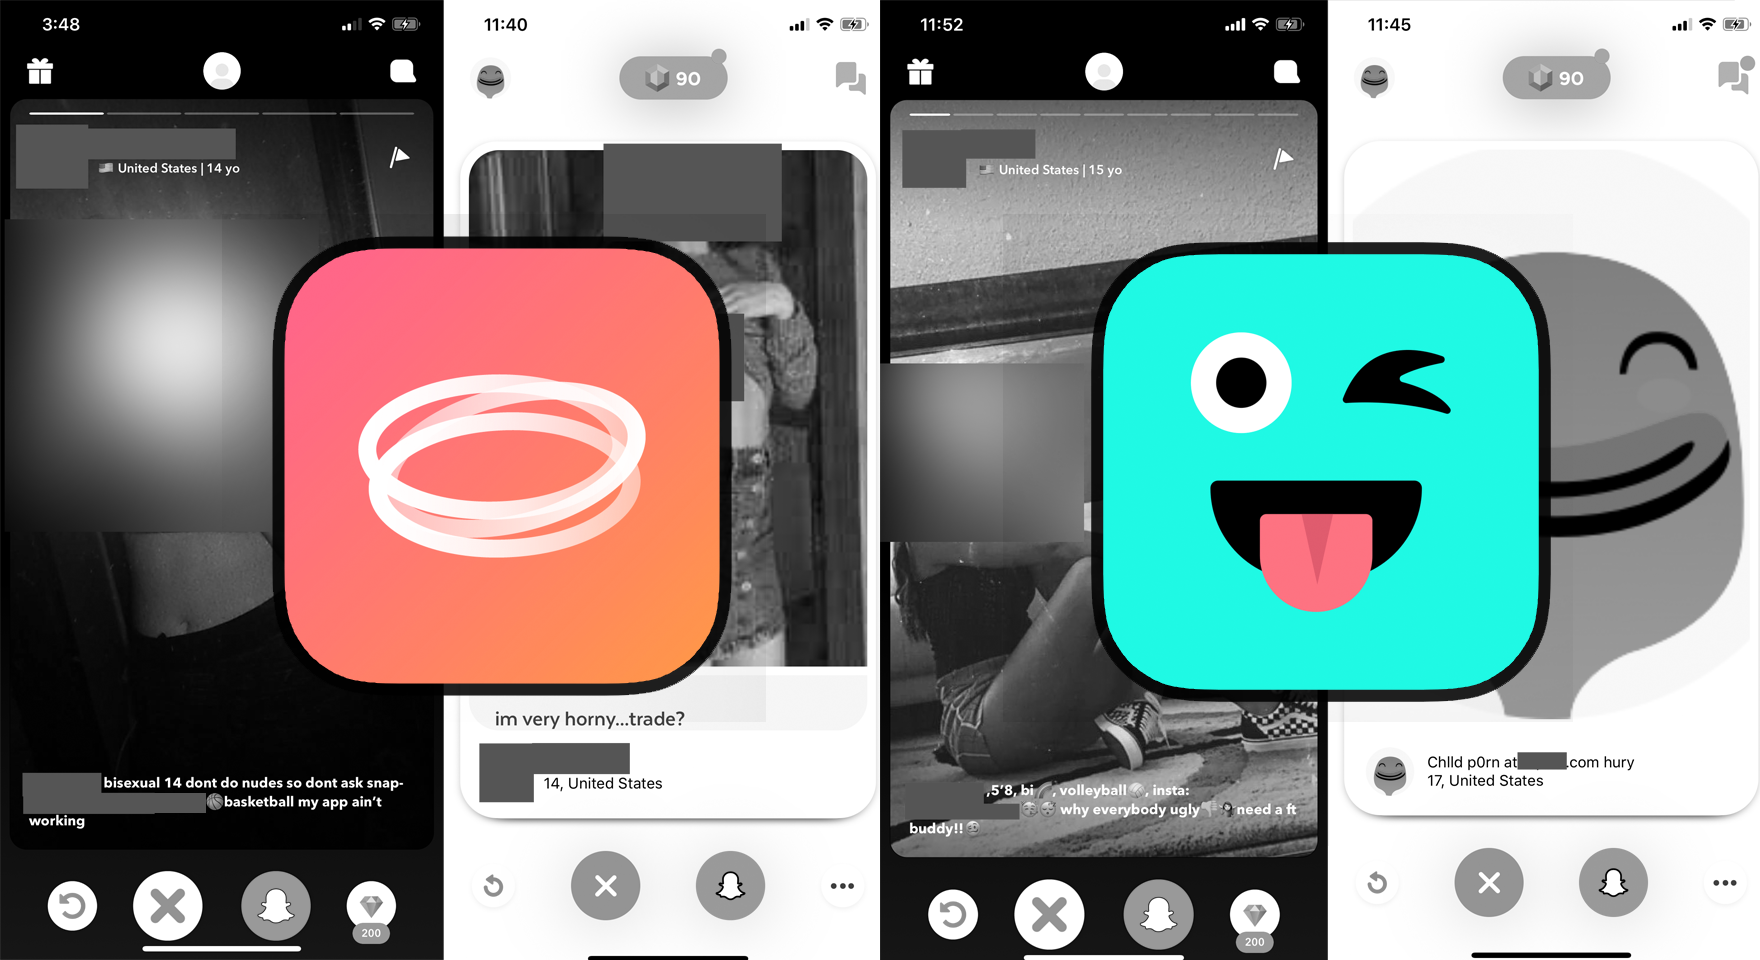 Hoop And Wink: Popular Teen-Centric Apps That Facilitate Sexting And Potential Predation